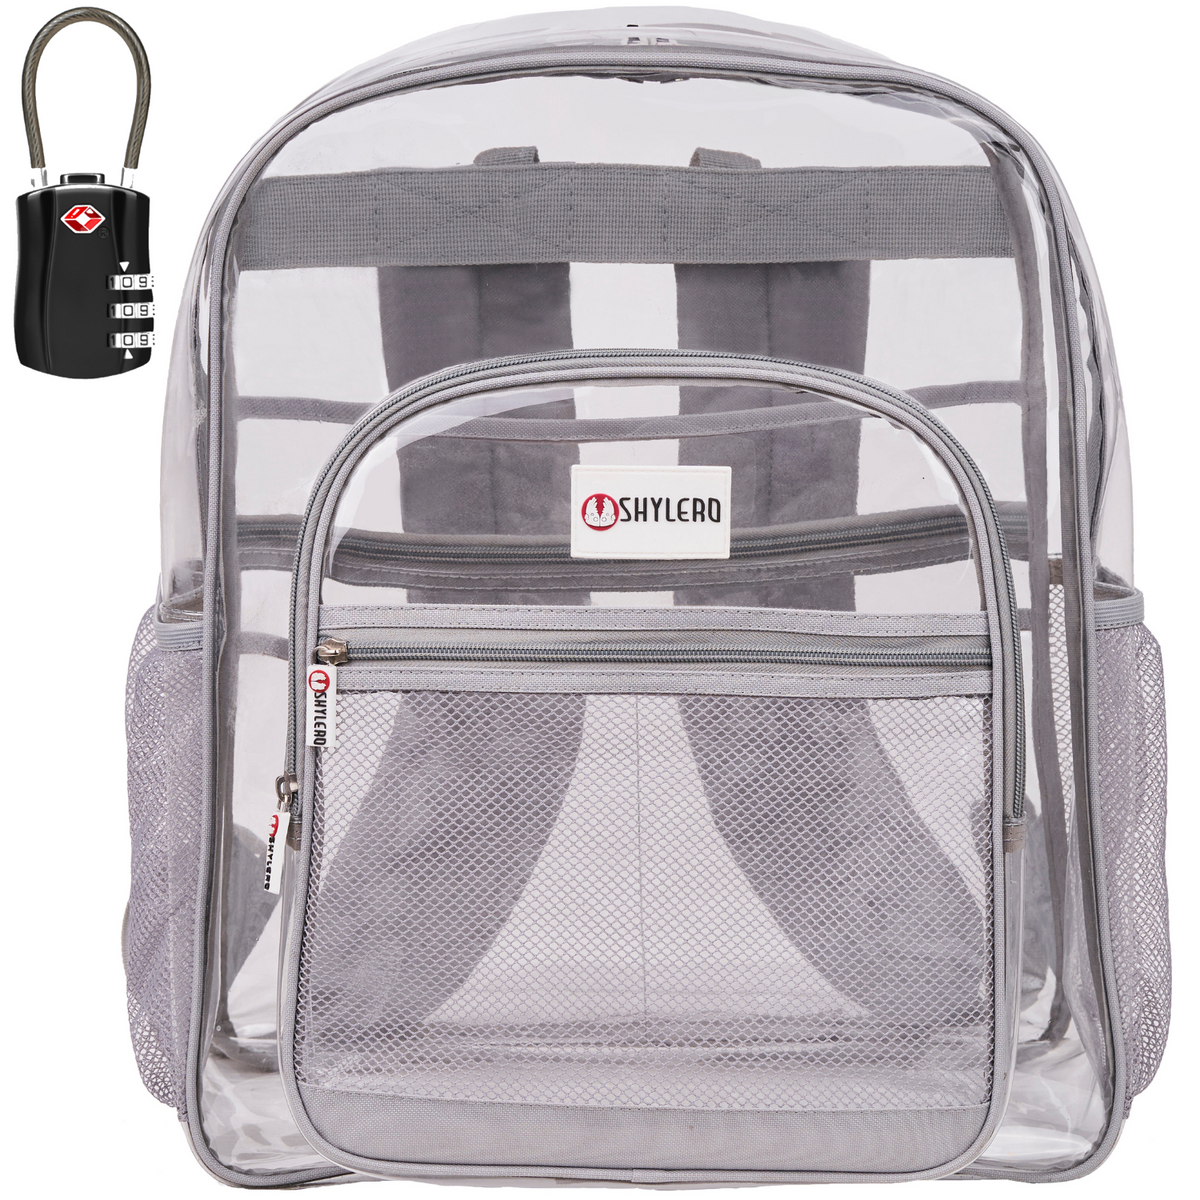 Clear Backpack For Work and School Backpack XL | TSA Lock | H18" x W14" x D8" (45cm x 35cm x 20cm) | 32 L | Grey Rhino